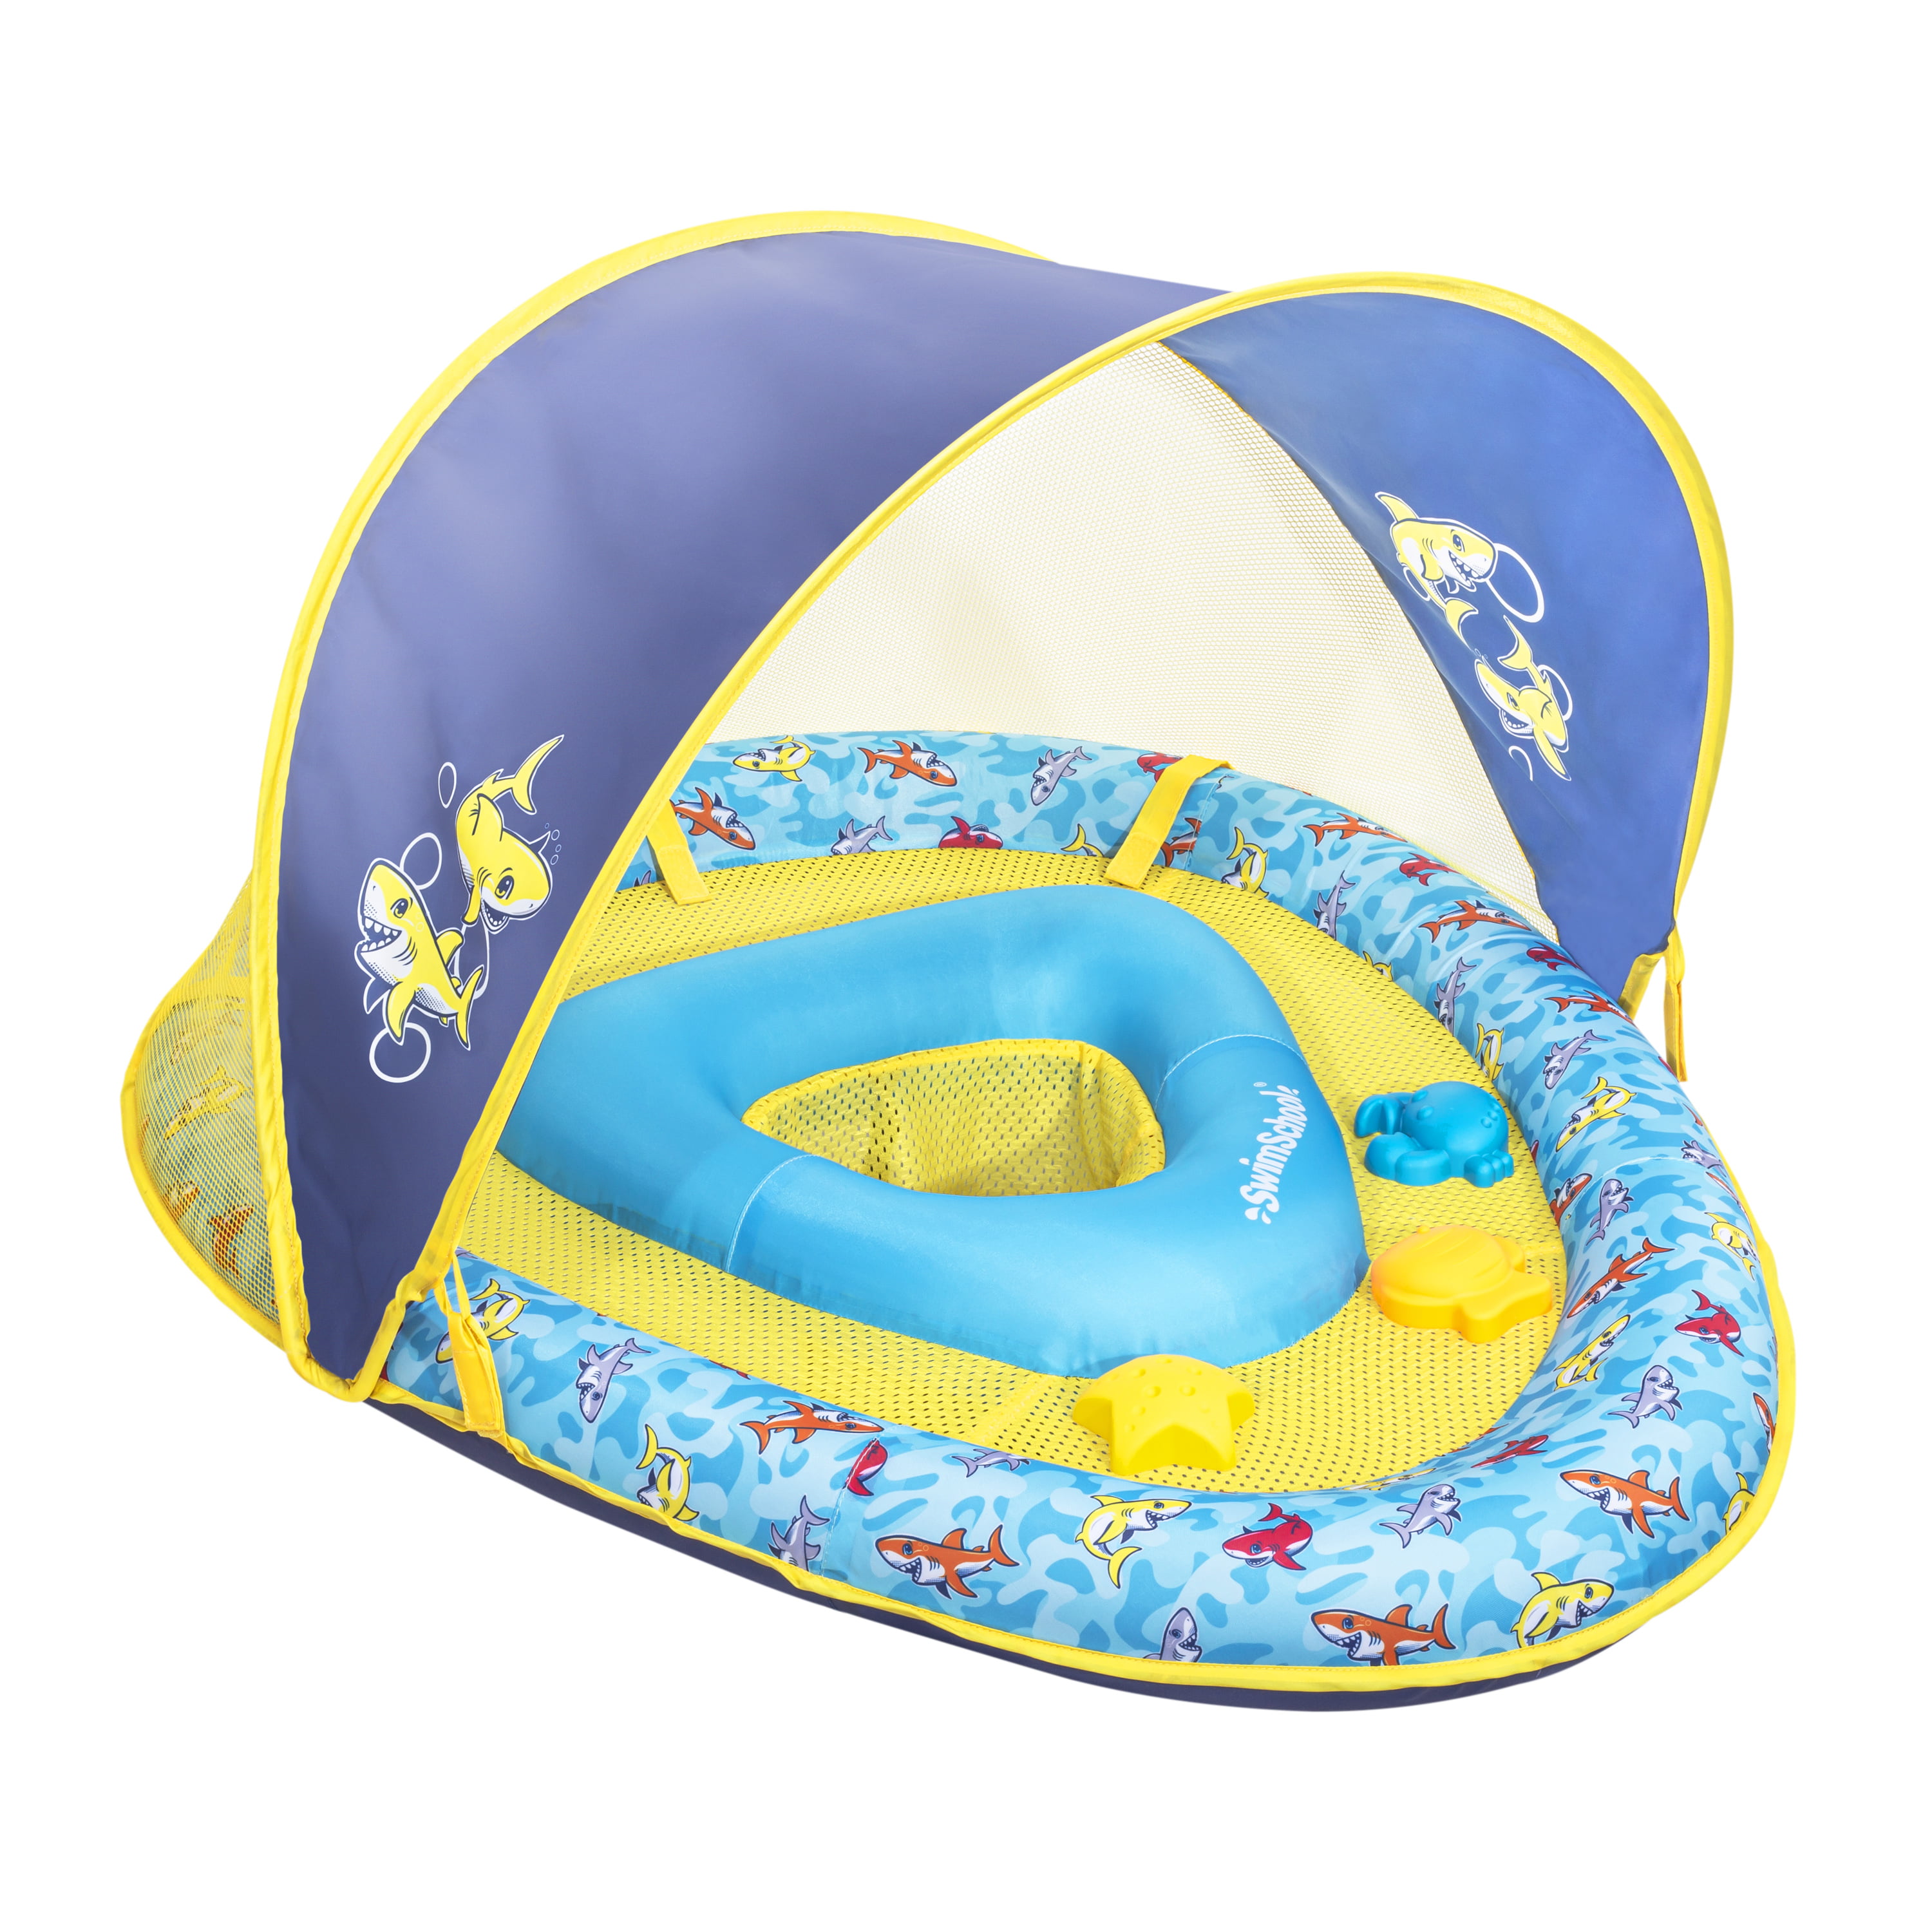 My Baby Float No 59574ep Intex Recreation 3pk for sale online